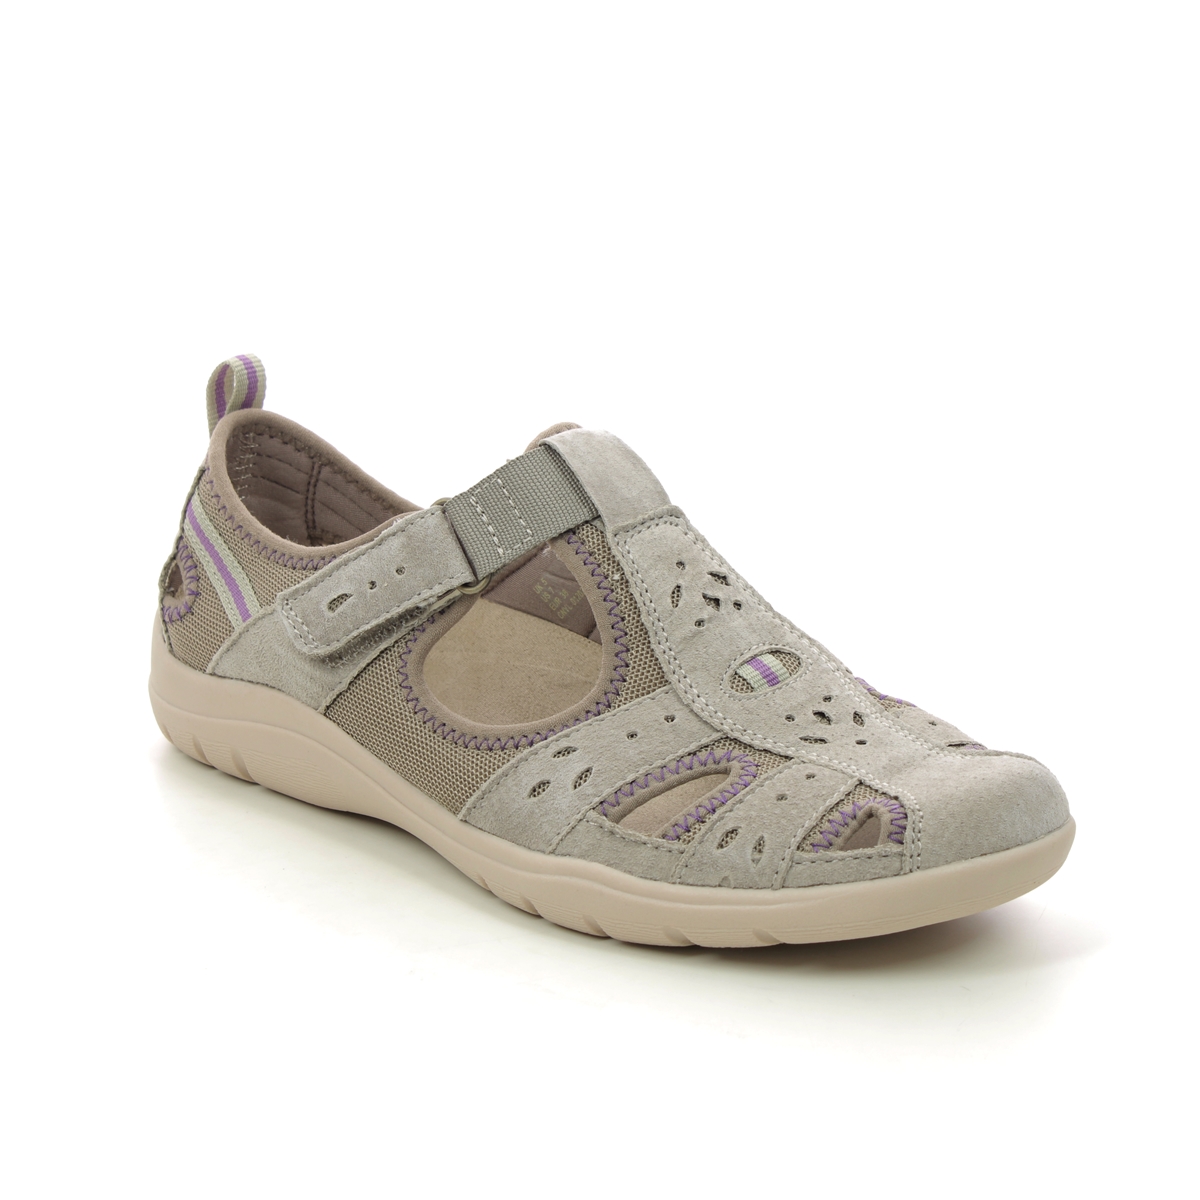 Earth Spirit Cleveland 01 Taupe suede Womens Closed Toe Sandals 40502-54 in a Plain Leather in Size 6